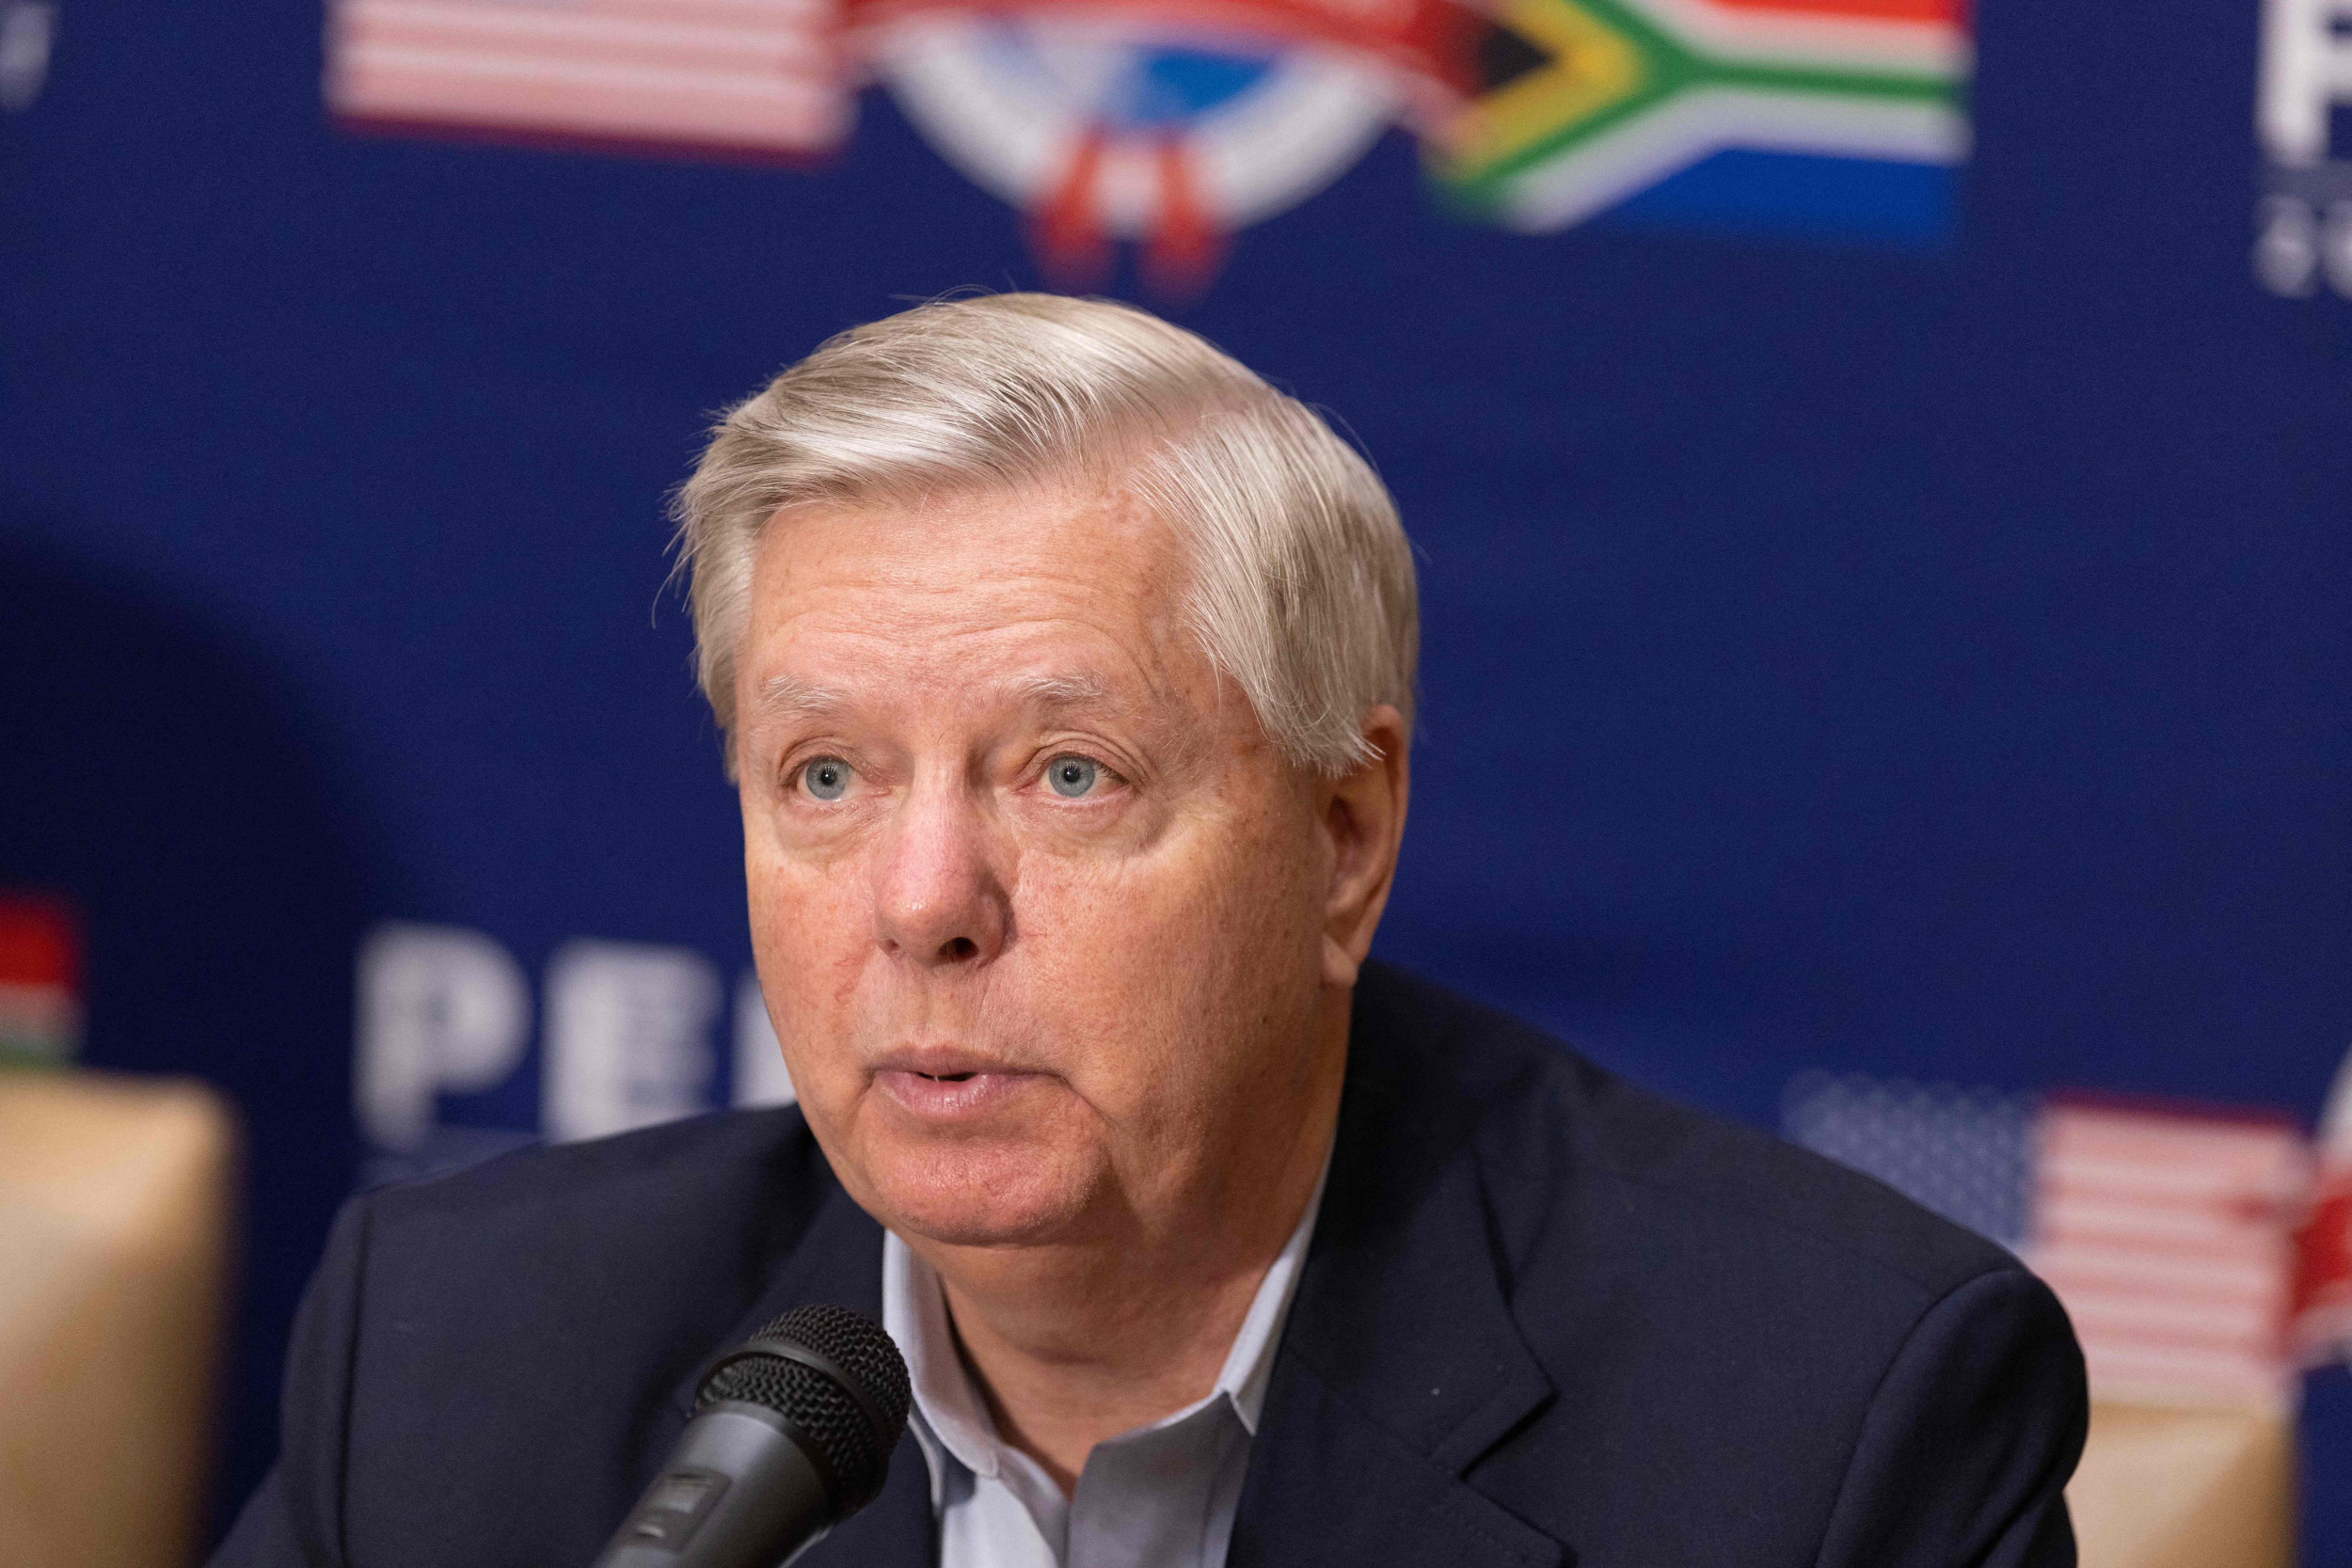 Lindsey Graham heckled by Fox News audience while defending Trump - breaking news today - World Updates - Public News Time